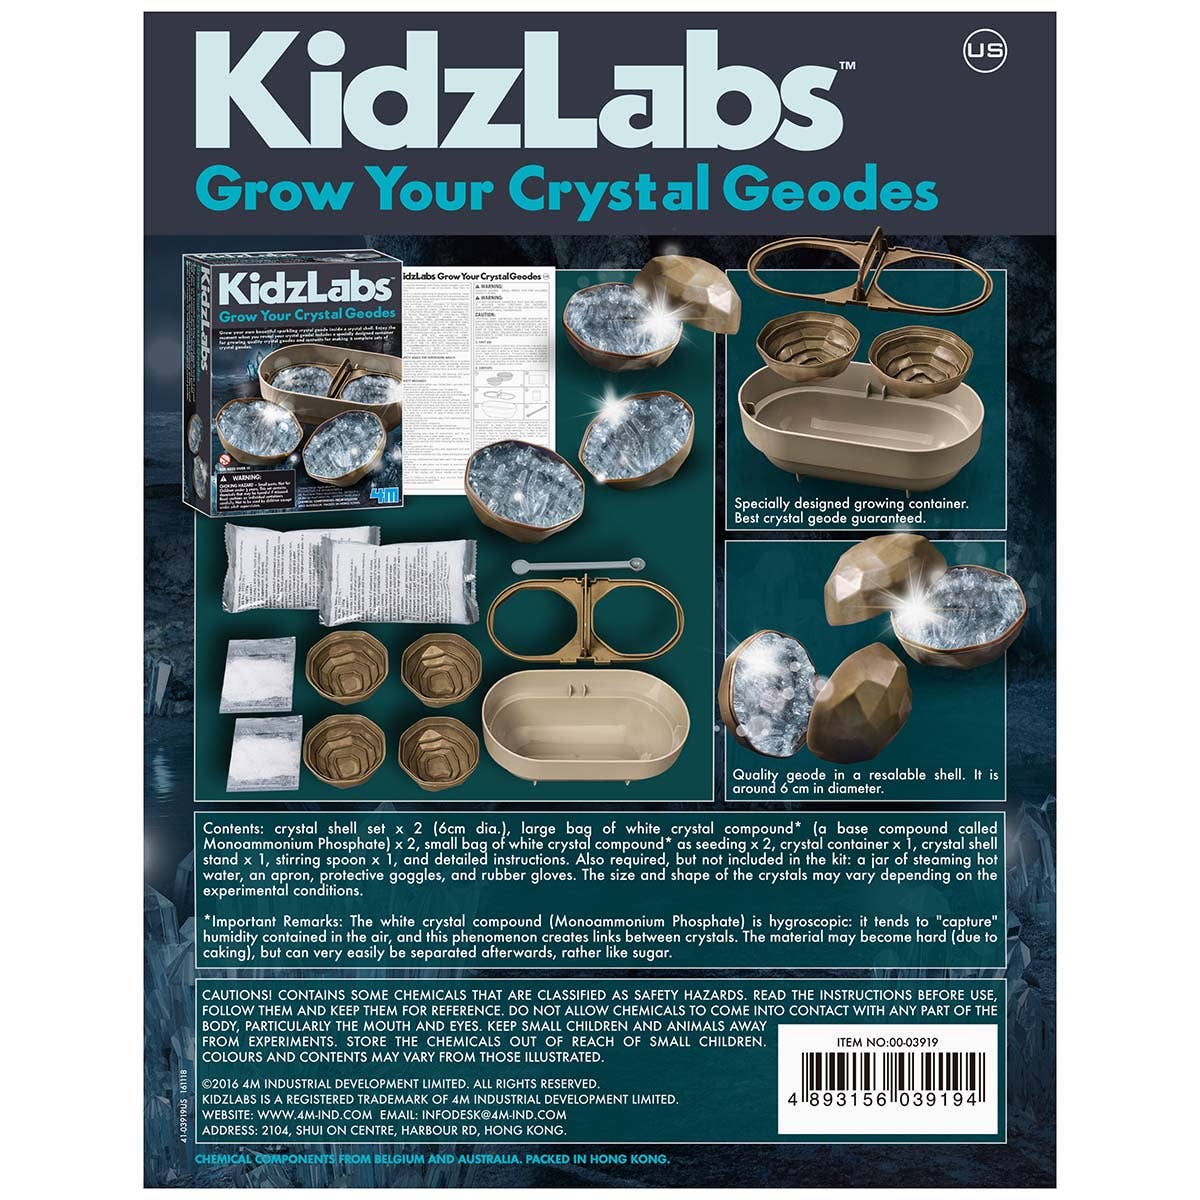 Image of the back of the Crystal Geode Growing Kit, showing the materials included.